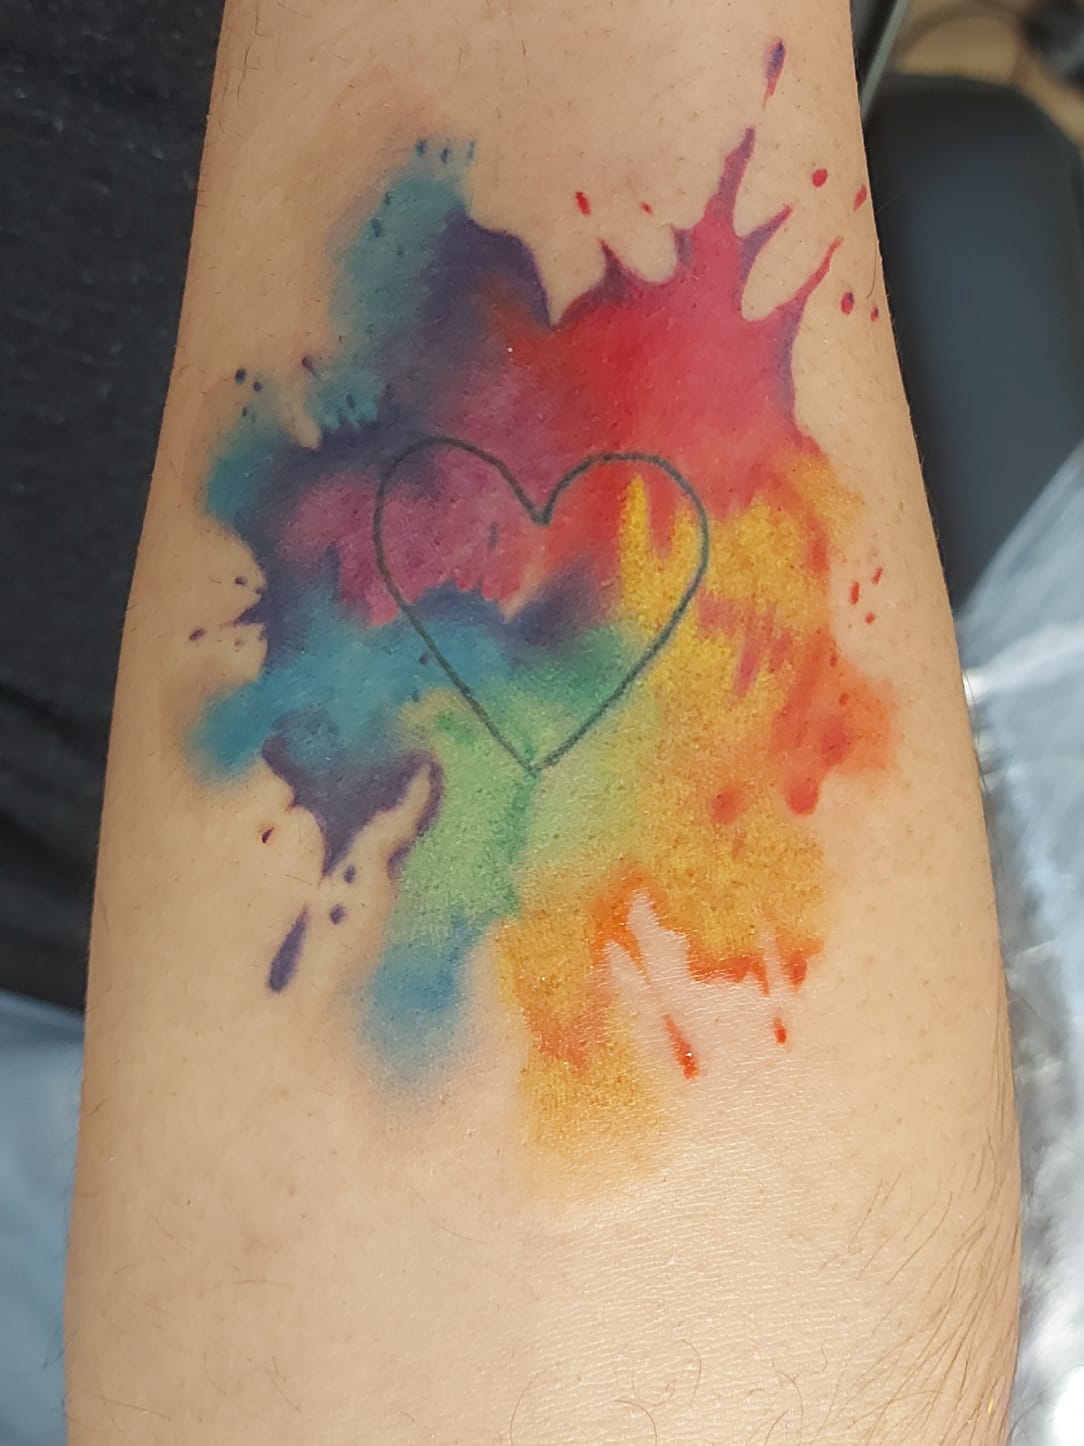 100 Awesome Heart Tattoo Designs with Meanings | Art and Design